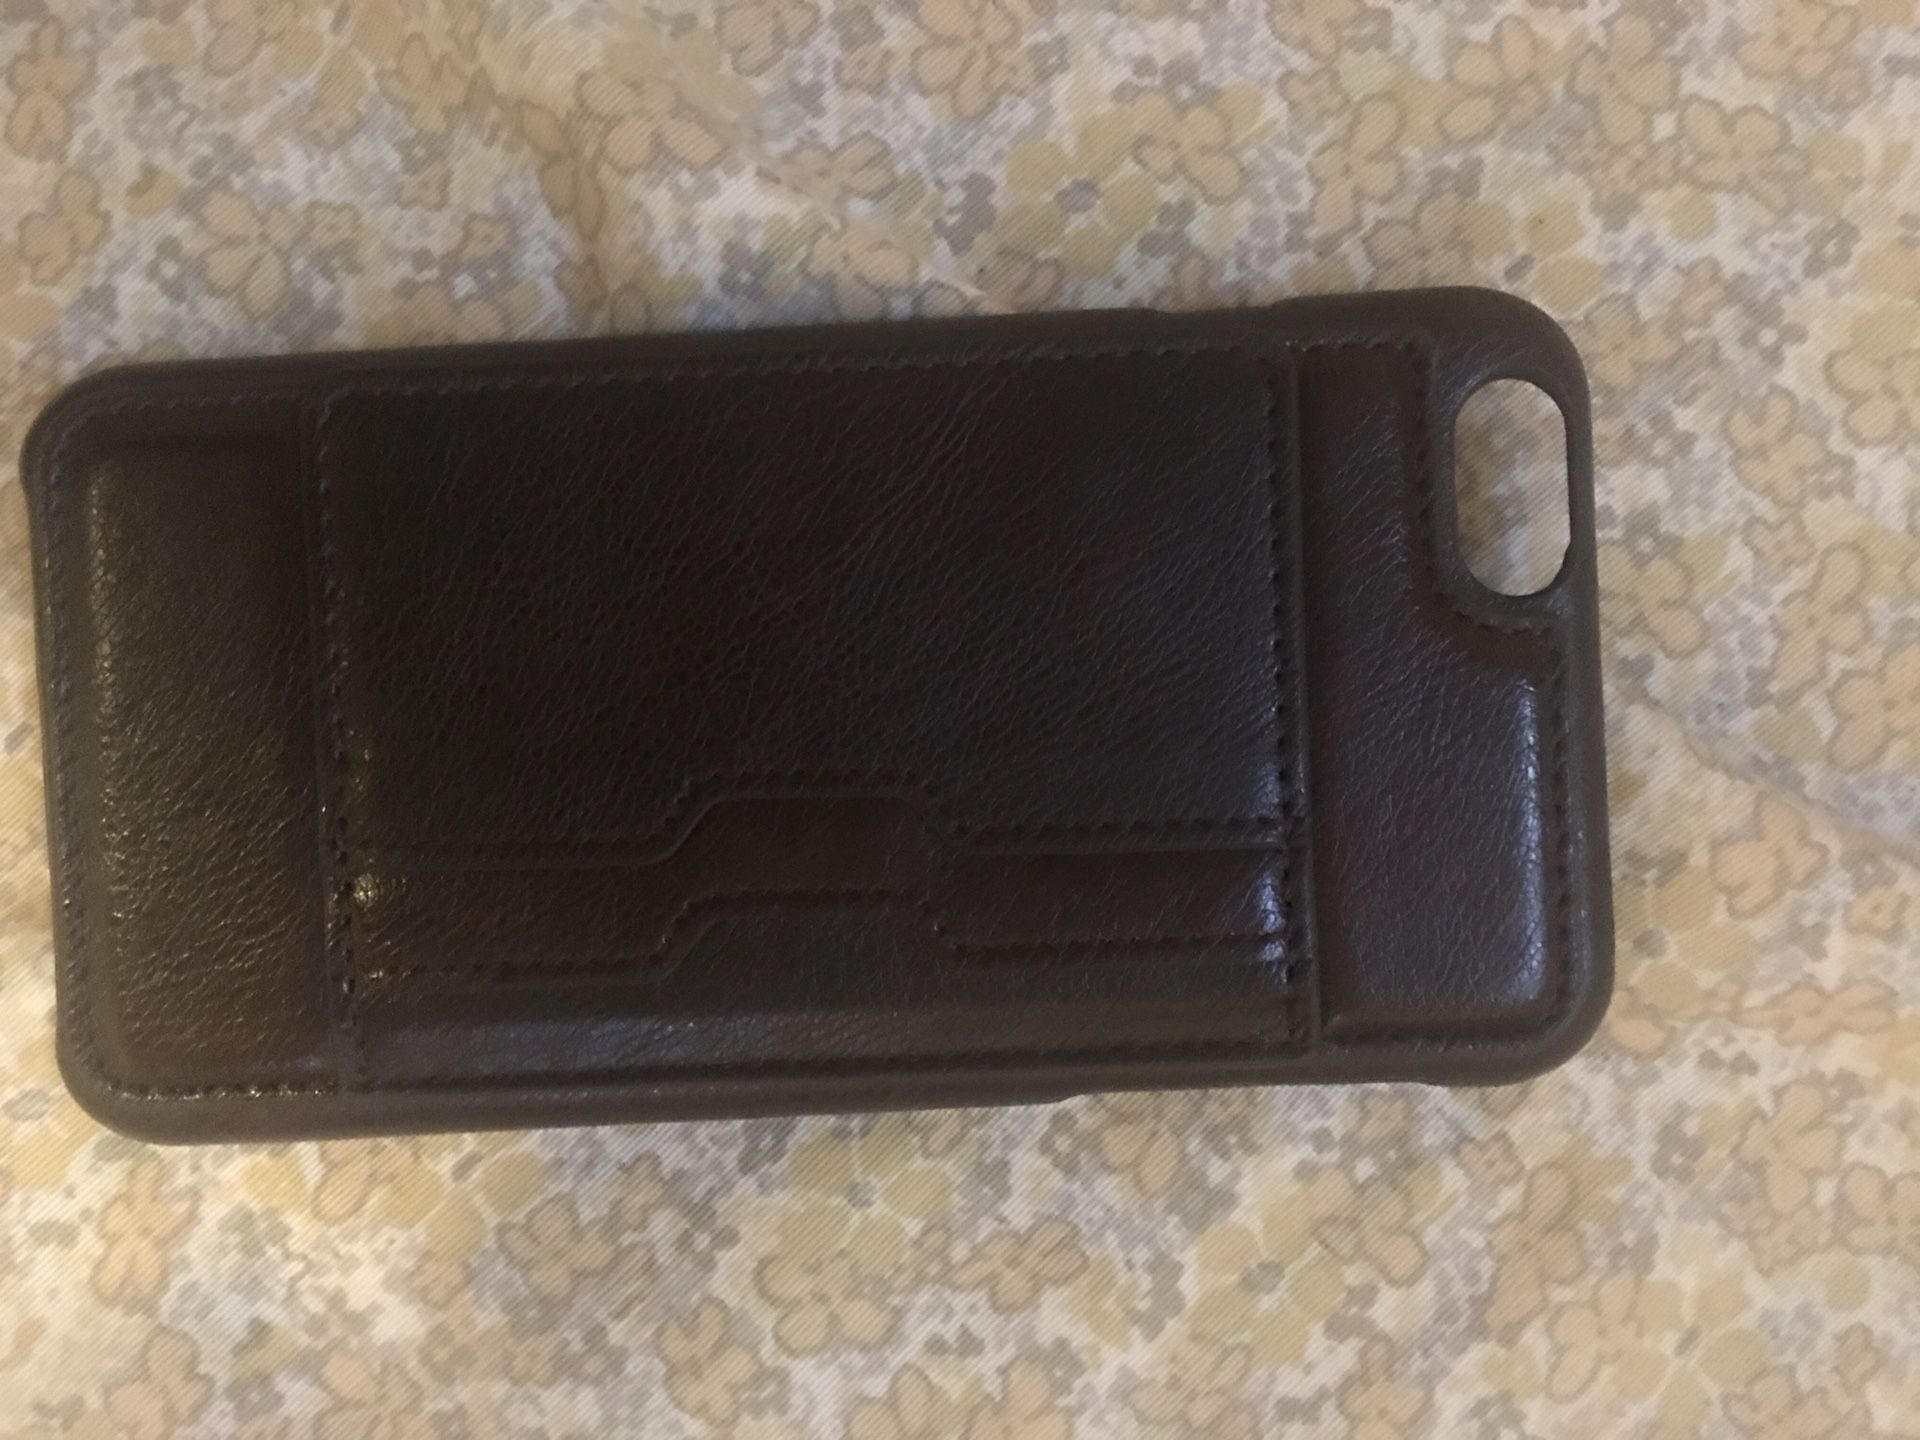 iPhone 6s Plus Leather Case New